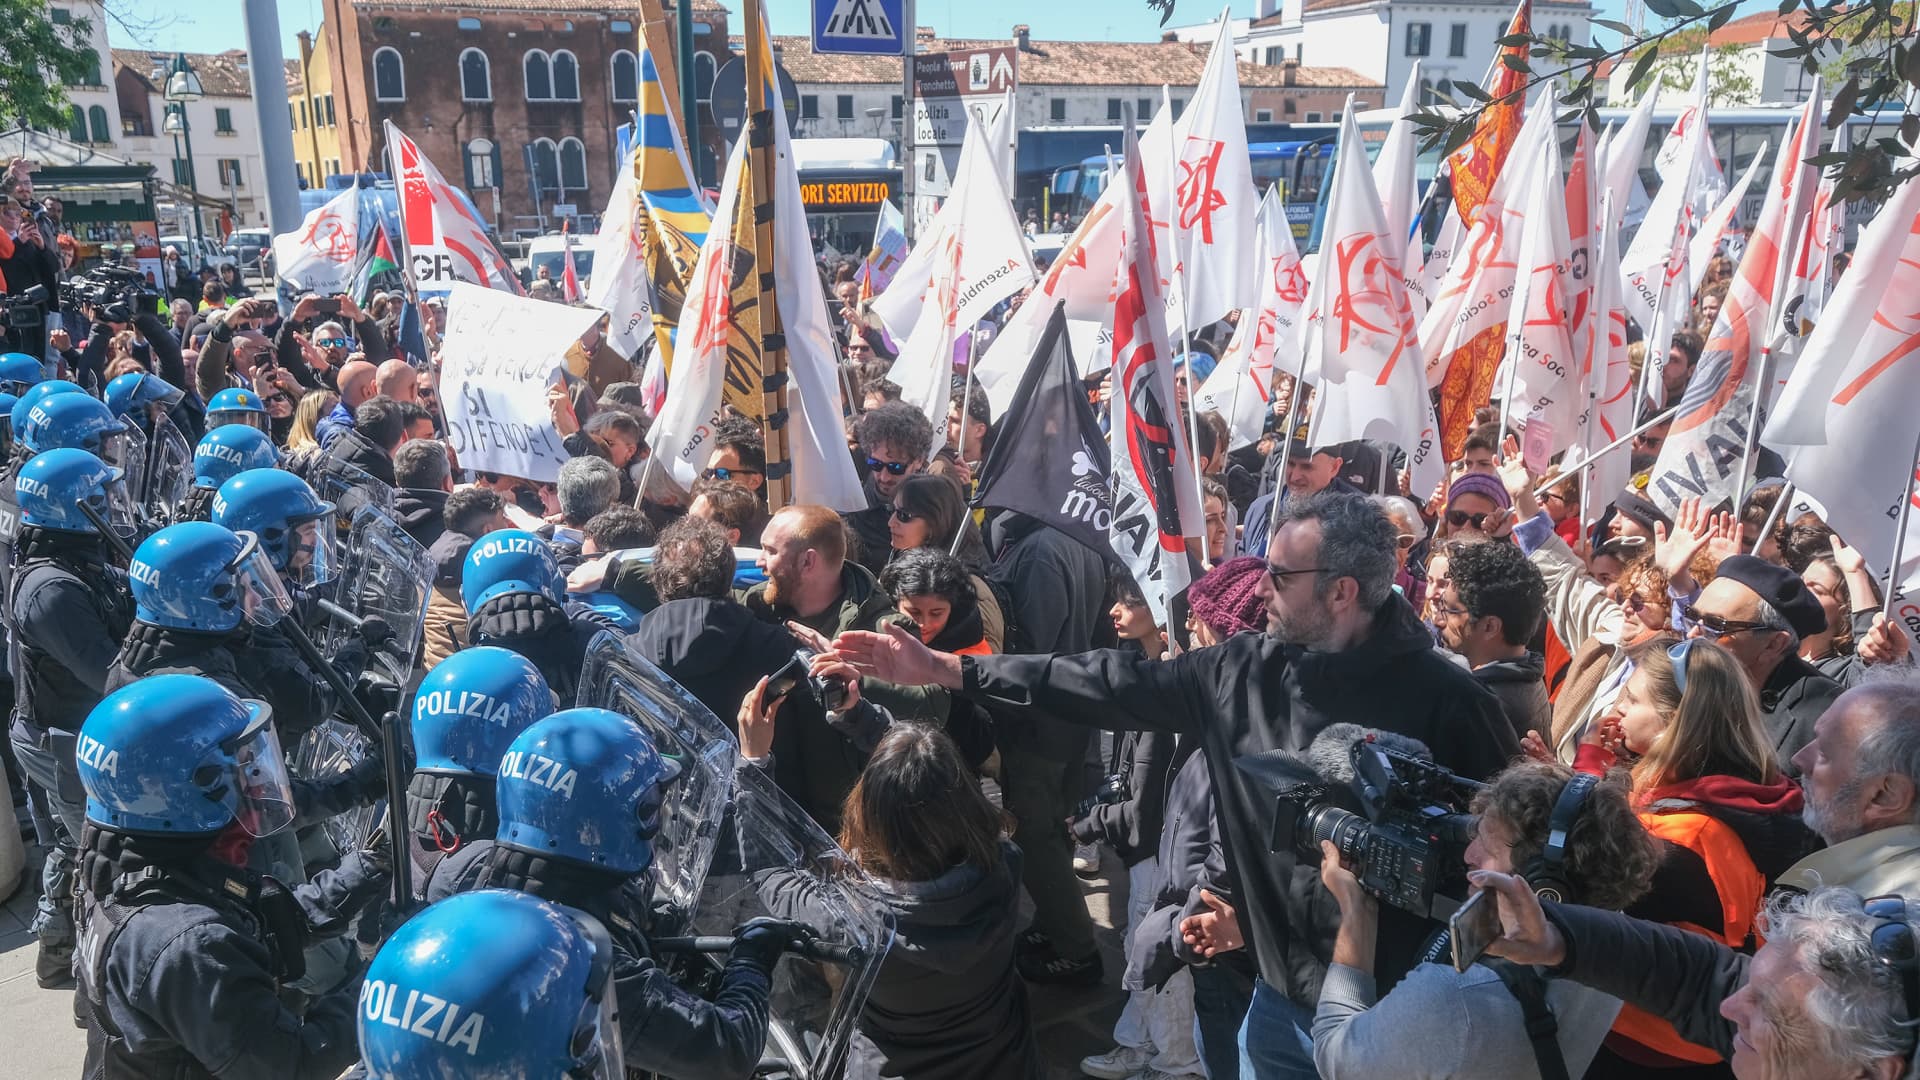 Demonstrators protest the 5€ entry fee in Venice.